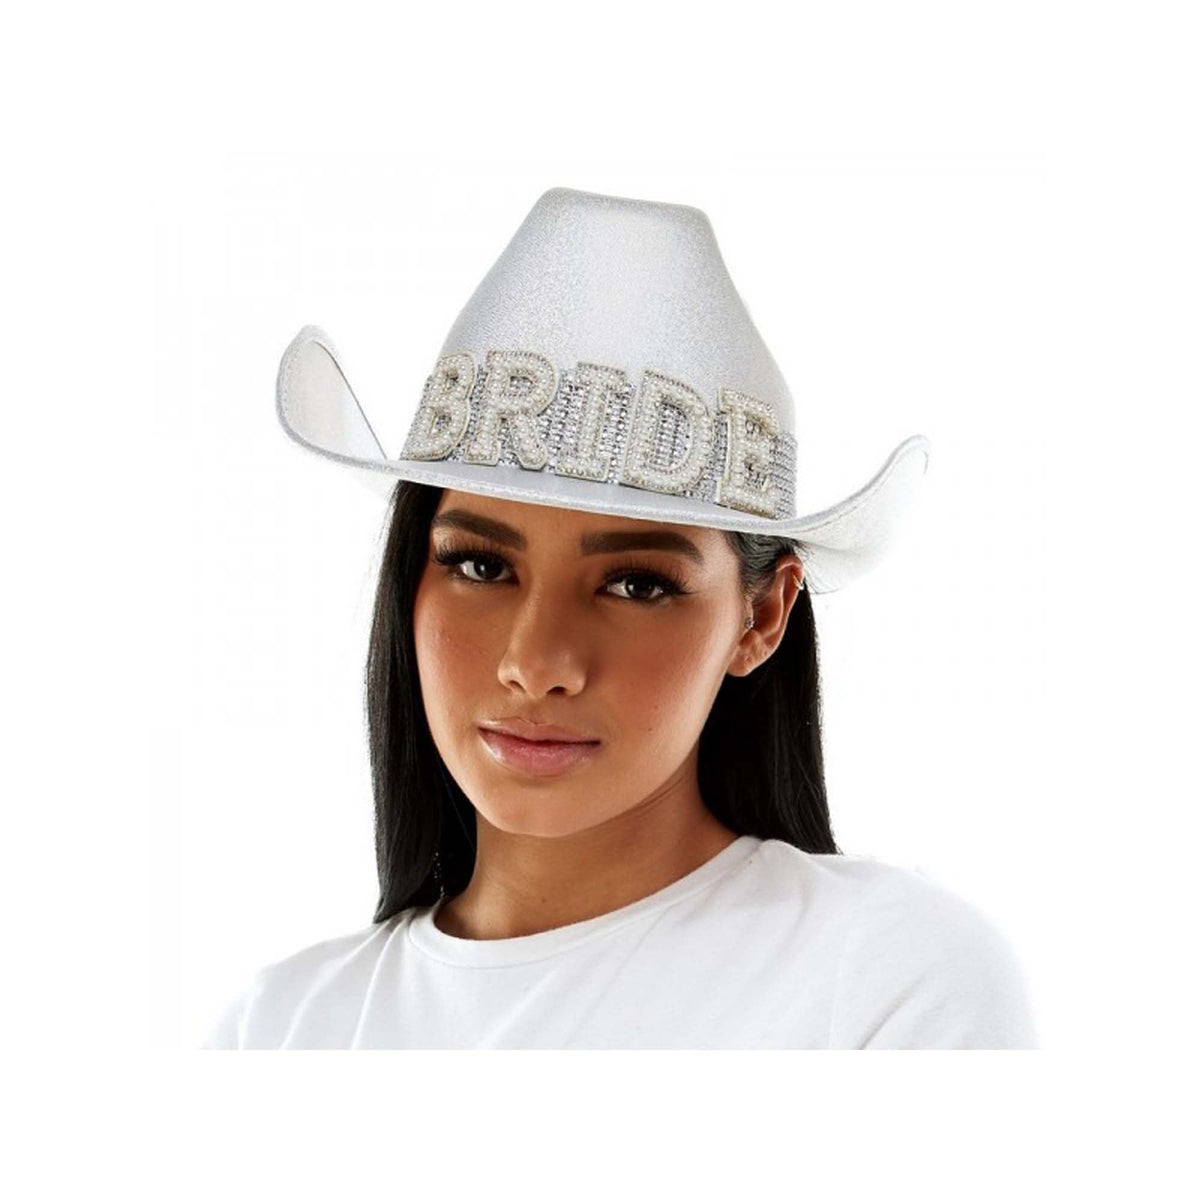 KBW GLOBAL CORP Costume Accessories Bride Iridescent White Cowboy Hat for Adults 831687041976